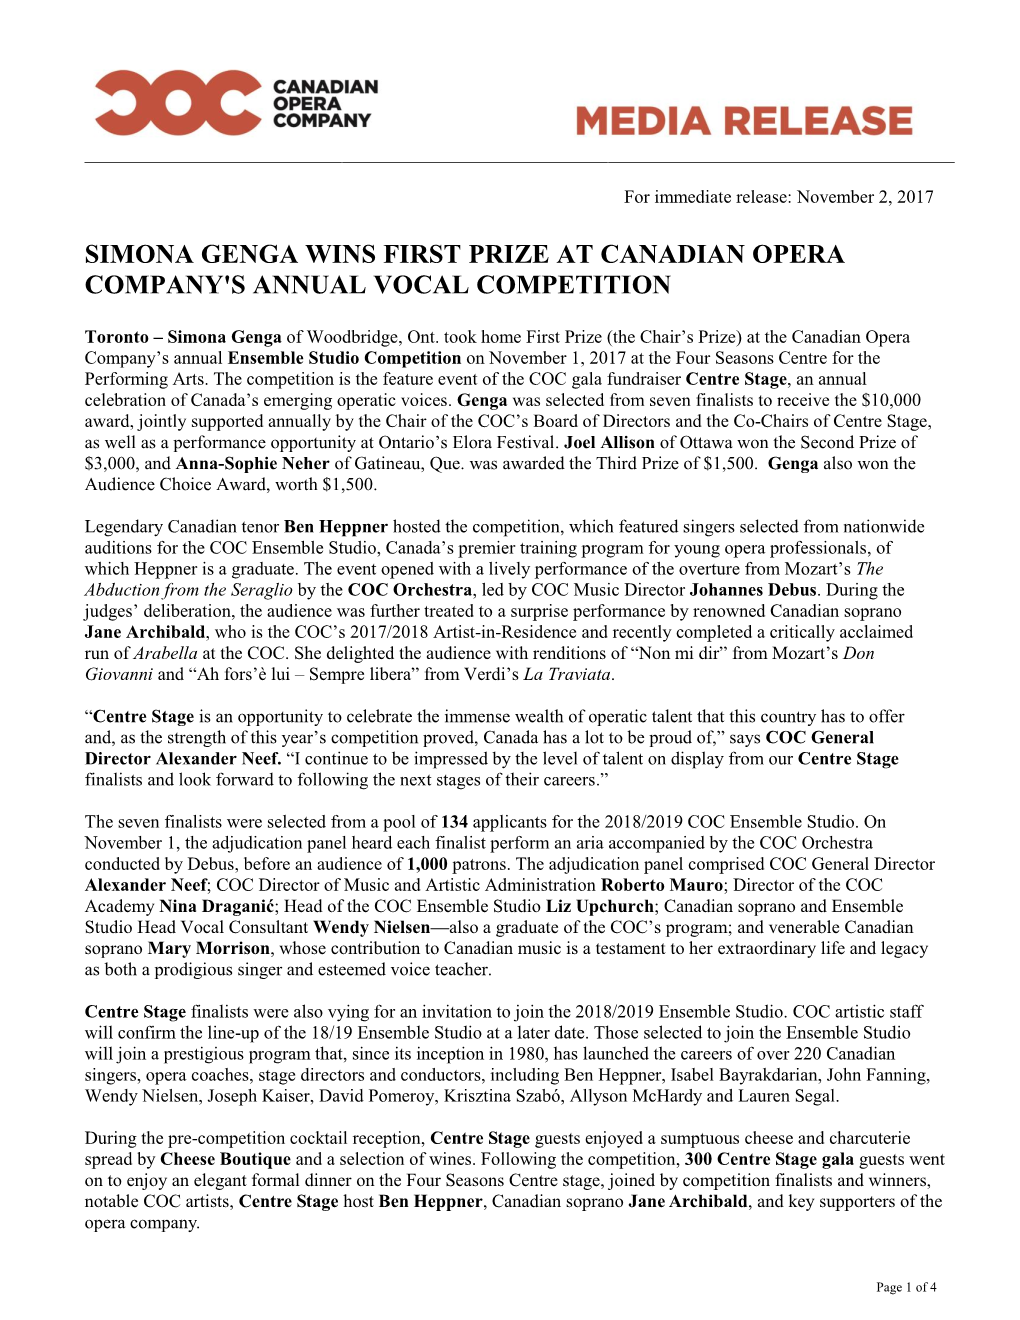 Simona Genga Wins First Prize at Canadian Opera Company's Annual Vocal Competition